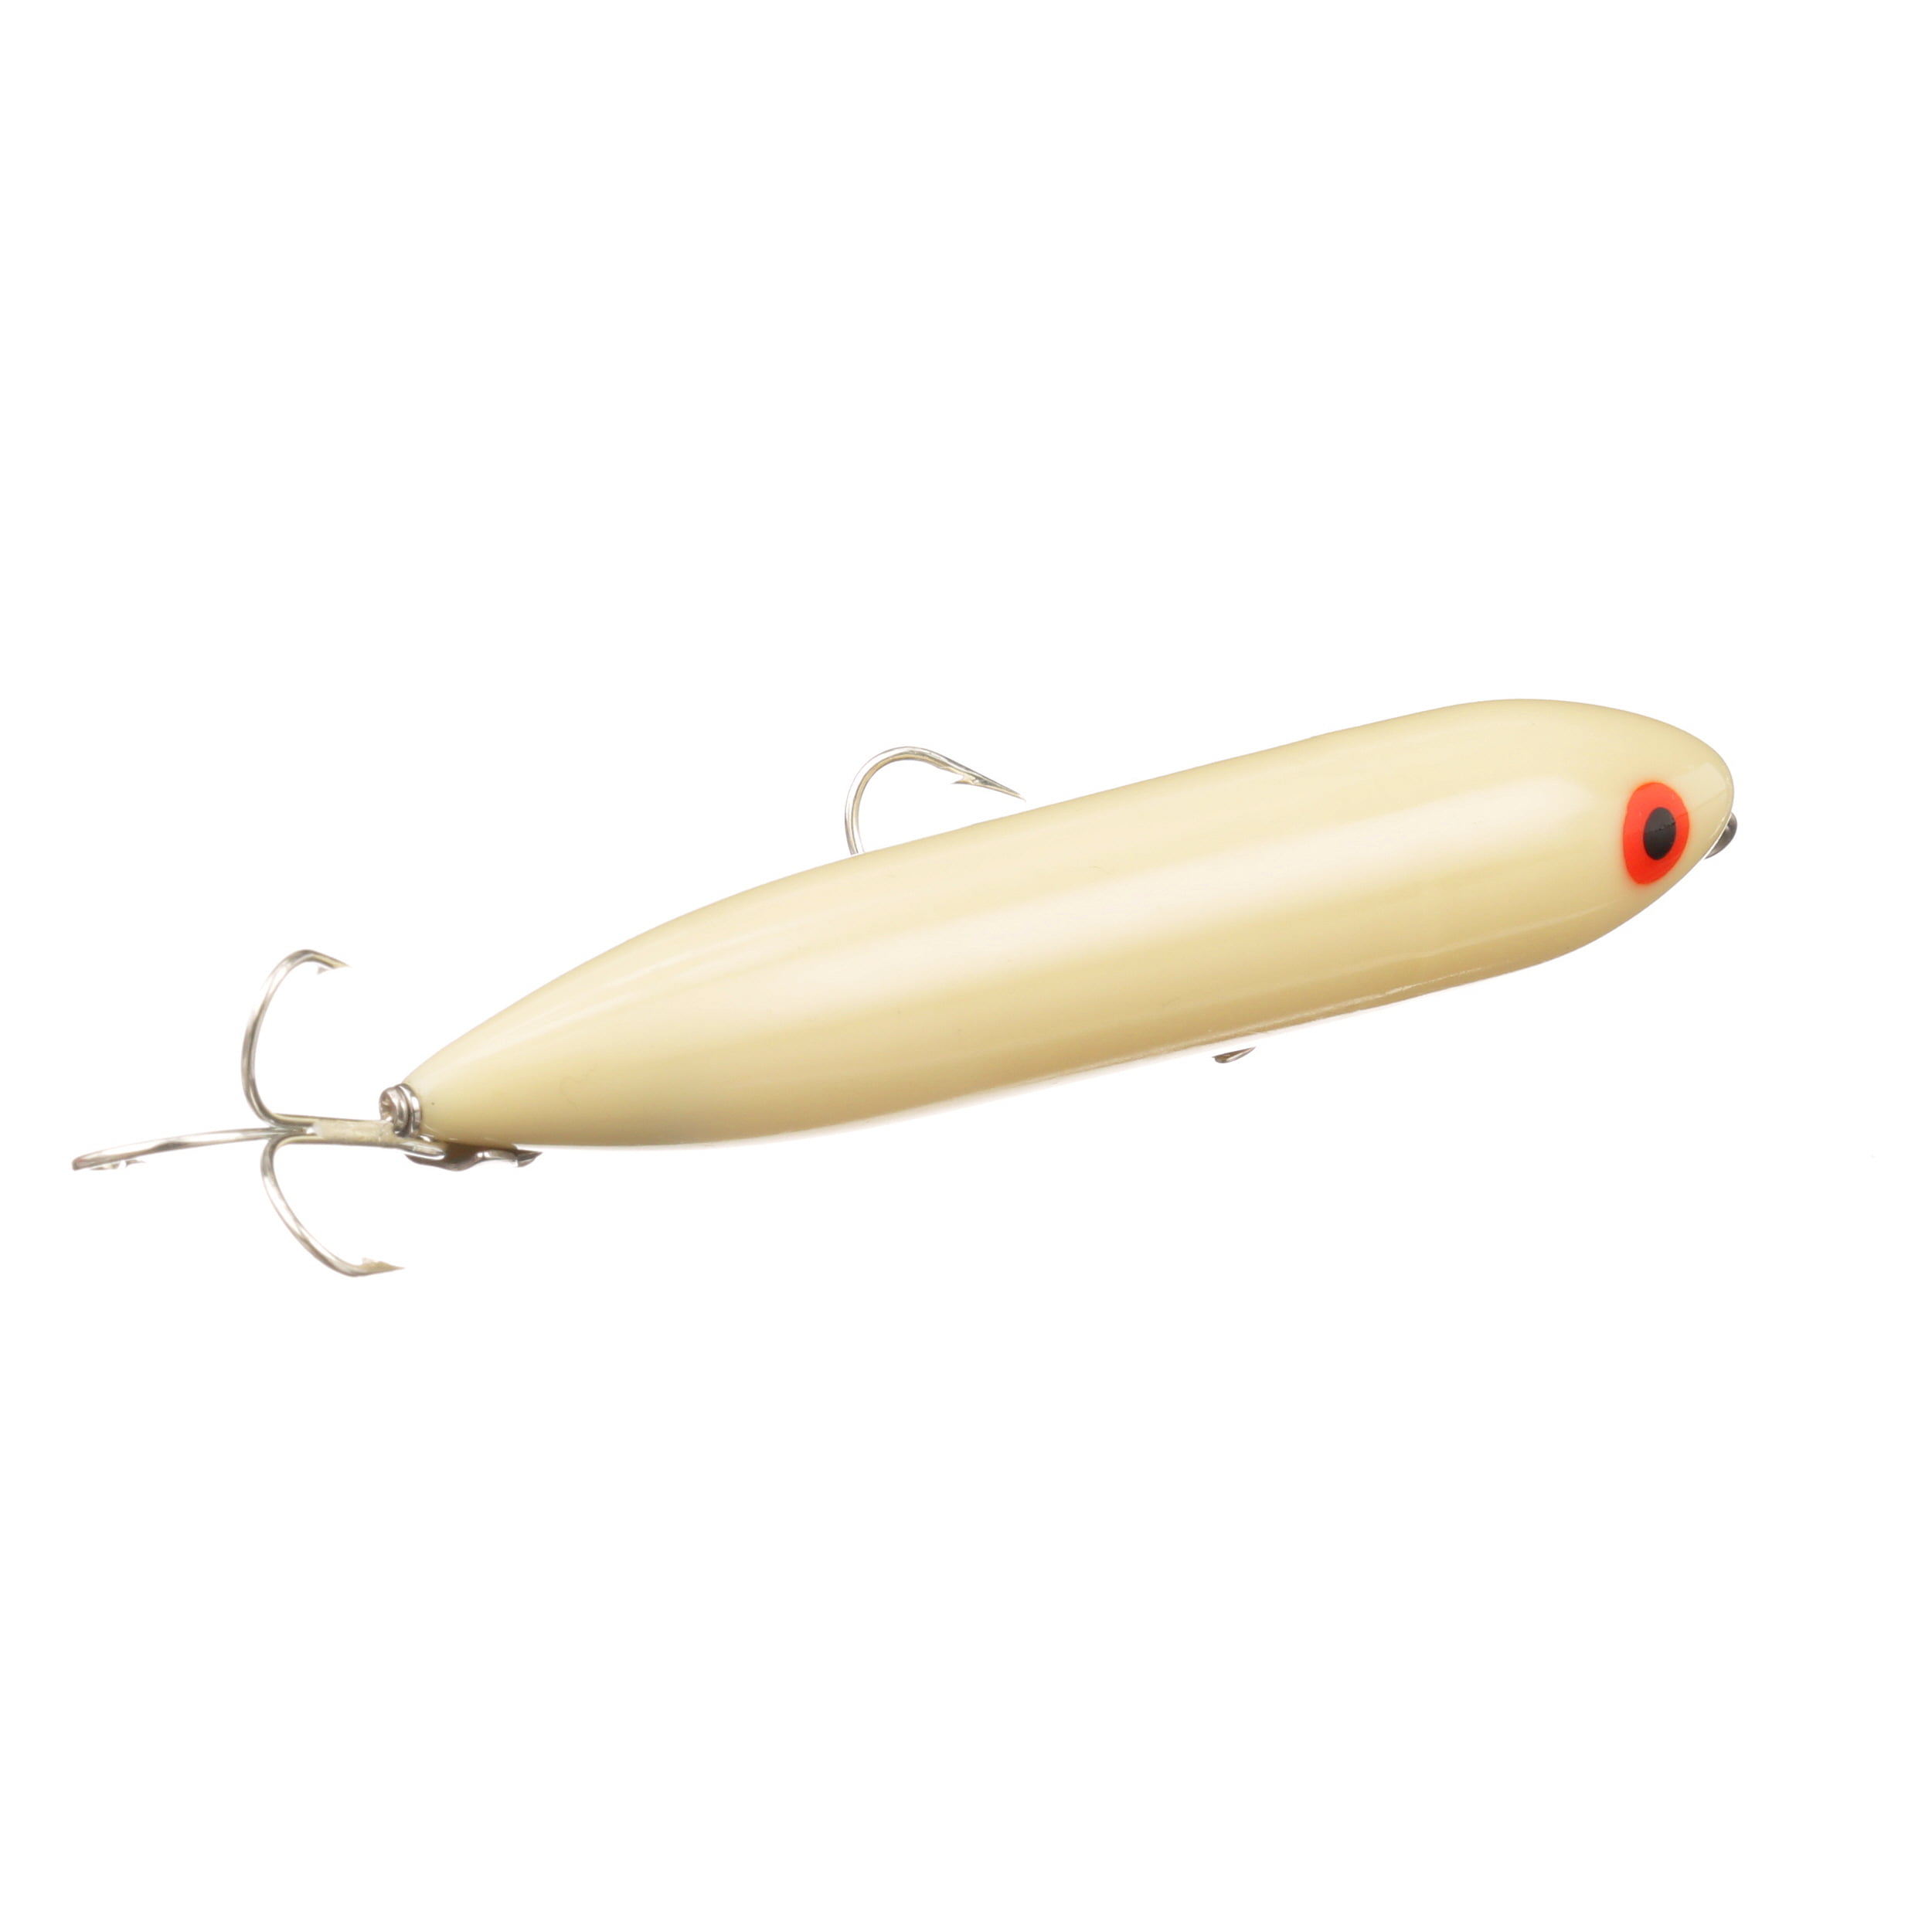 Black & White 2 1/2 inch Heddon Punkinseed Ornament Lure 